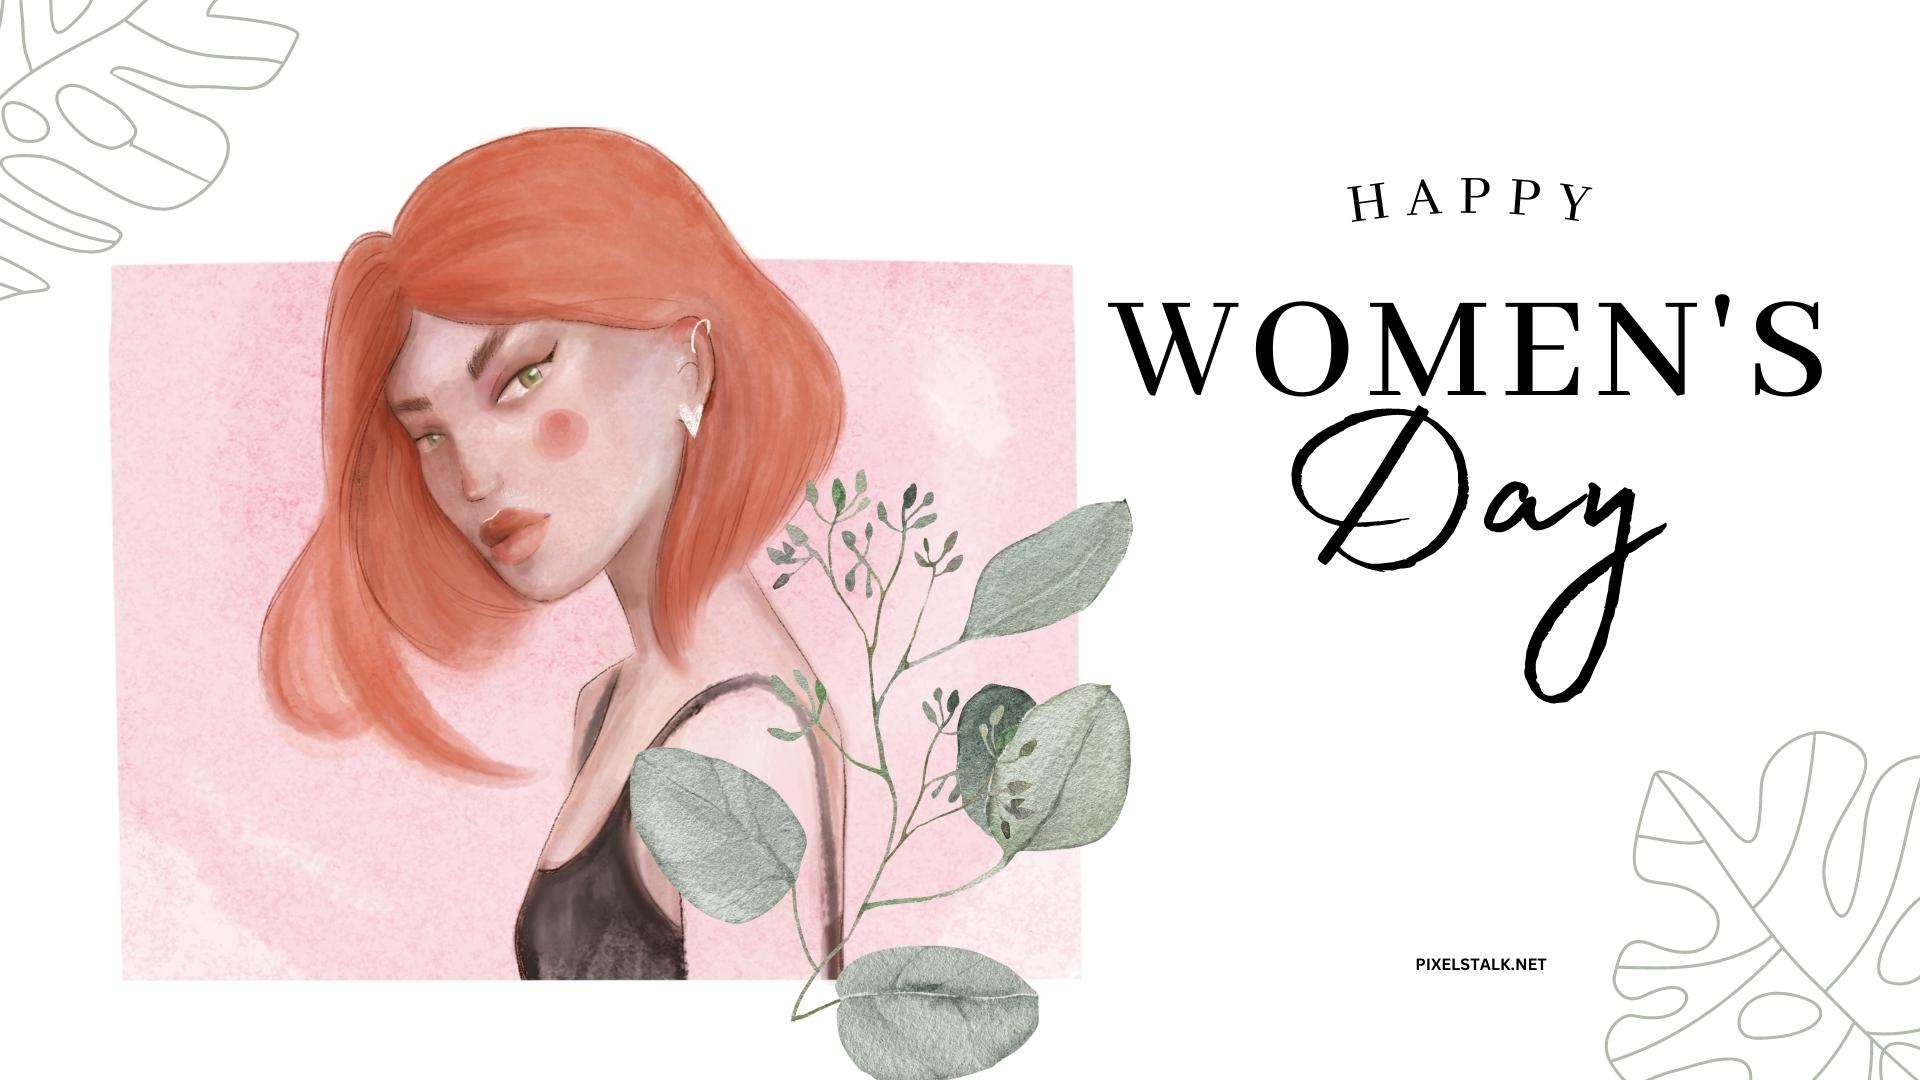 Womens Day HD Wallpaper Free download.